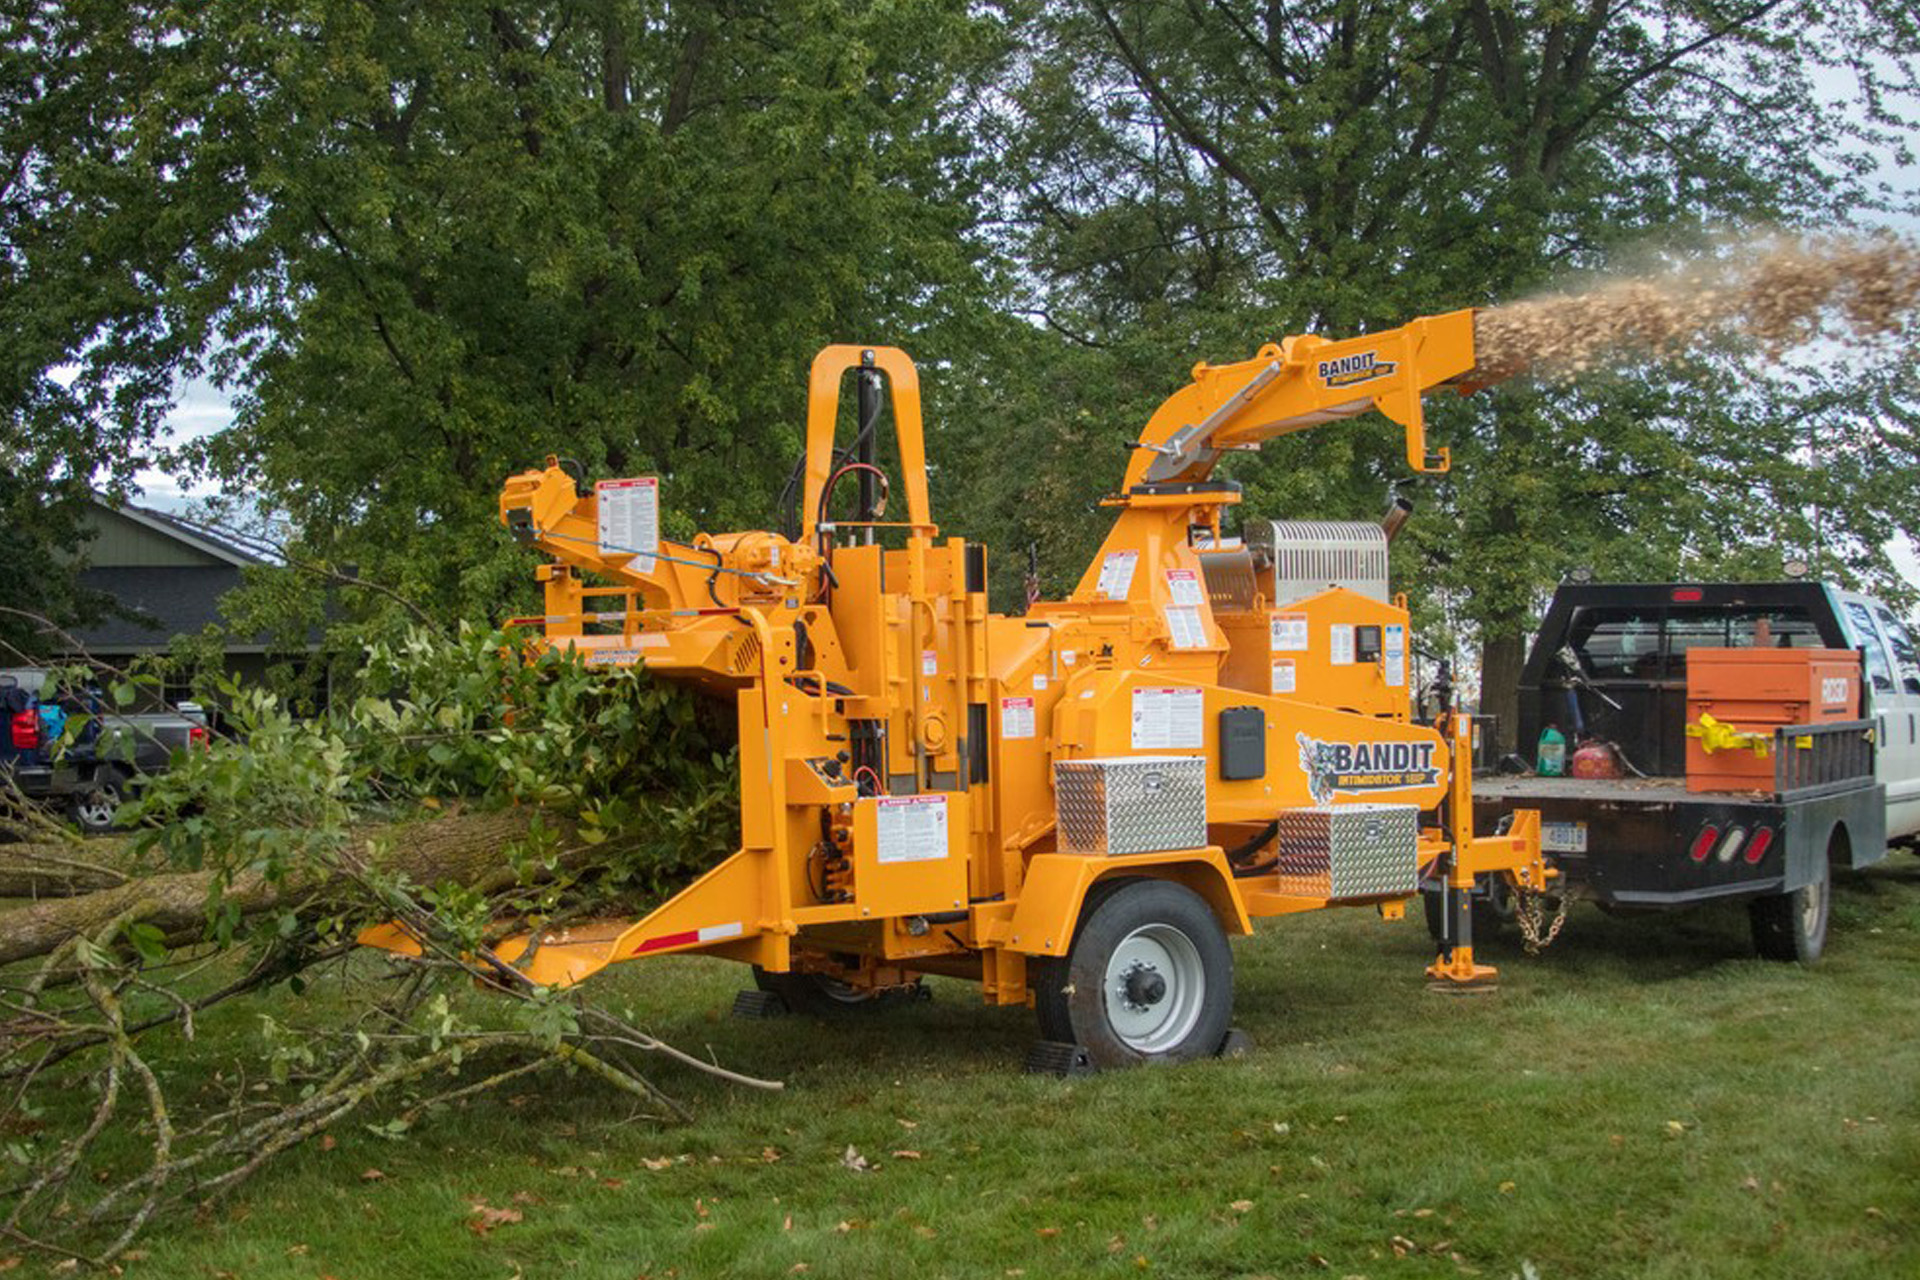 Bandit Hand-Fed Wood Chipper Intimidator 18XP Iron Source in Delaware